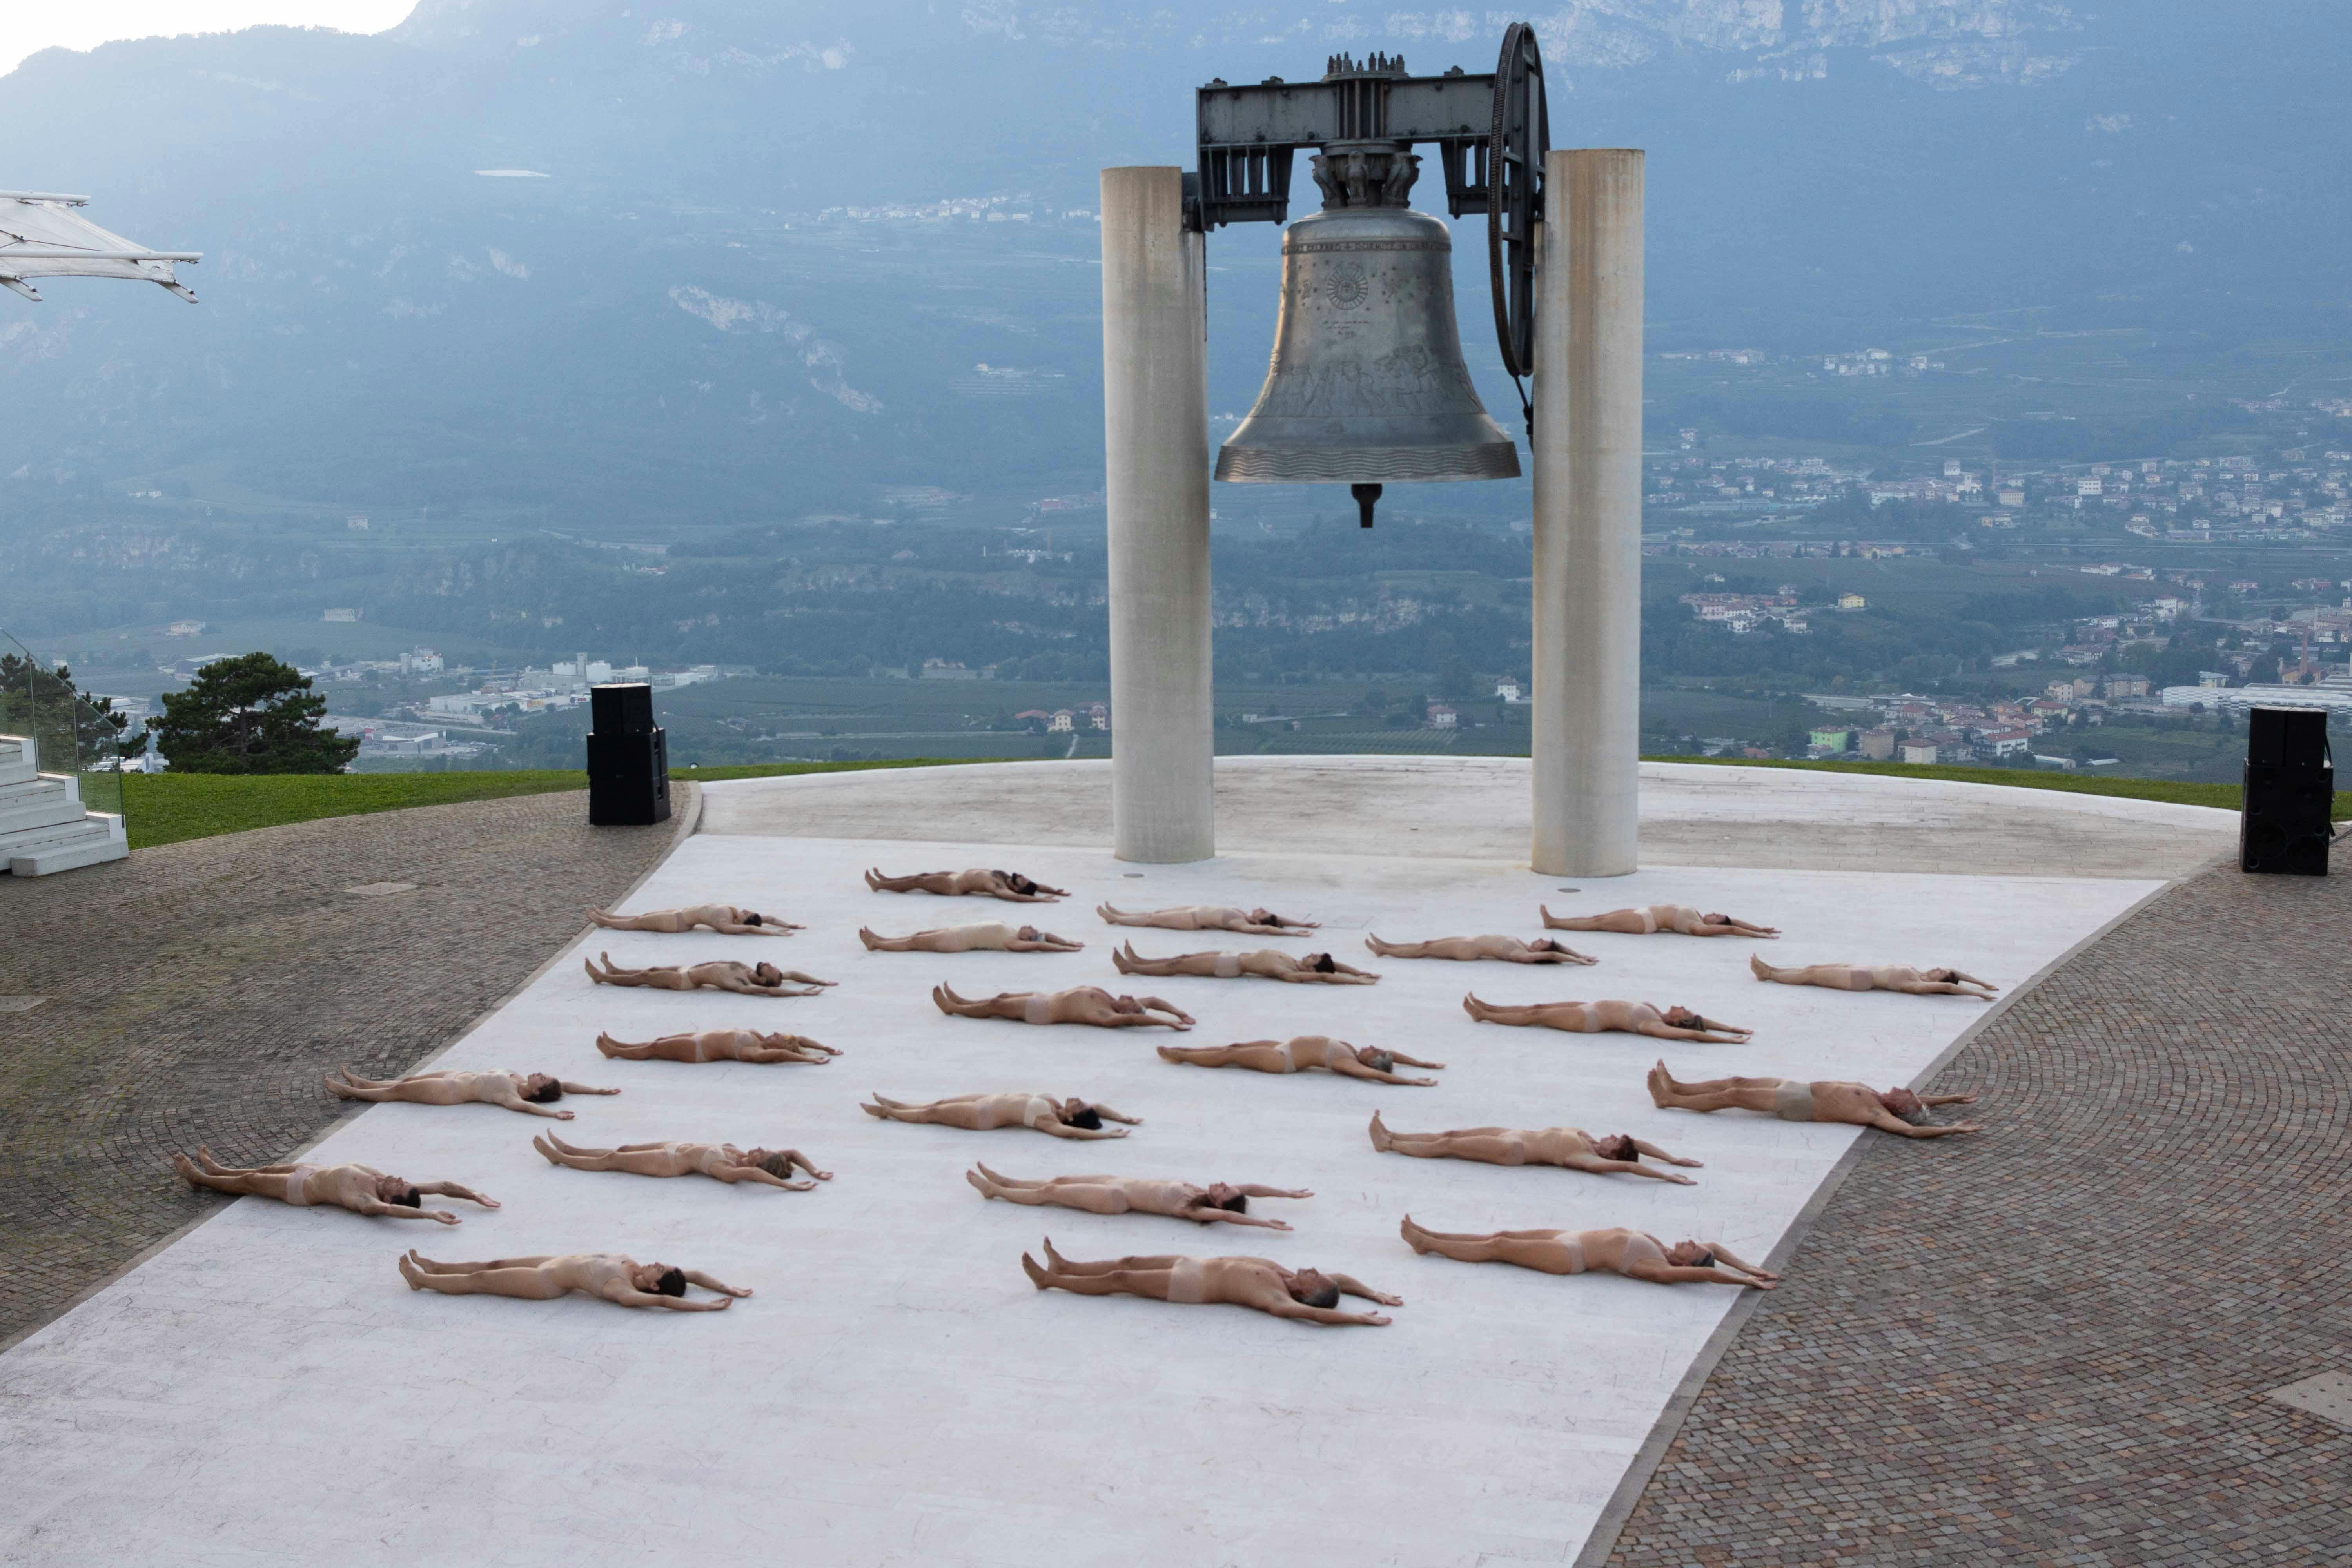 In front of the Campana dei Caduti in Rovereto, numerous human bodies are lying on the ground, facing upwards, naked. Their arrangement in space is orderly.